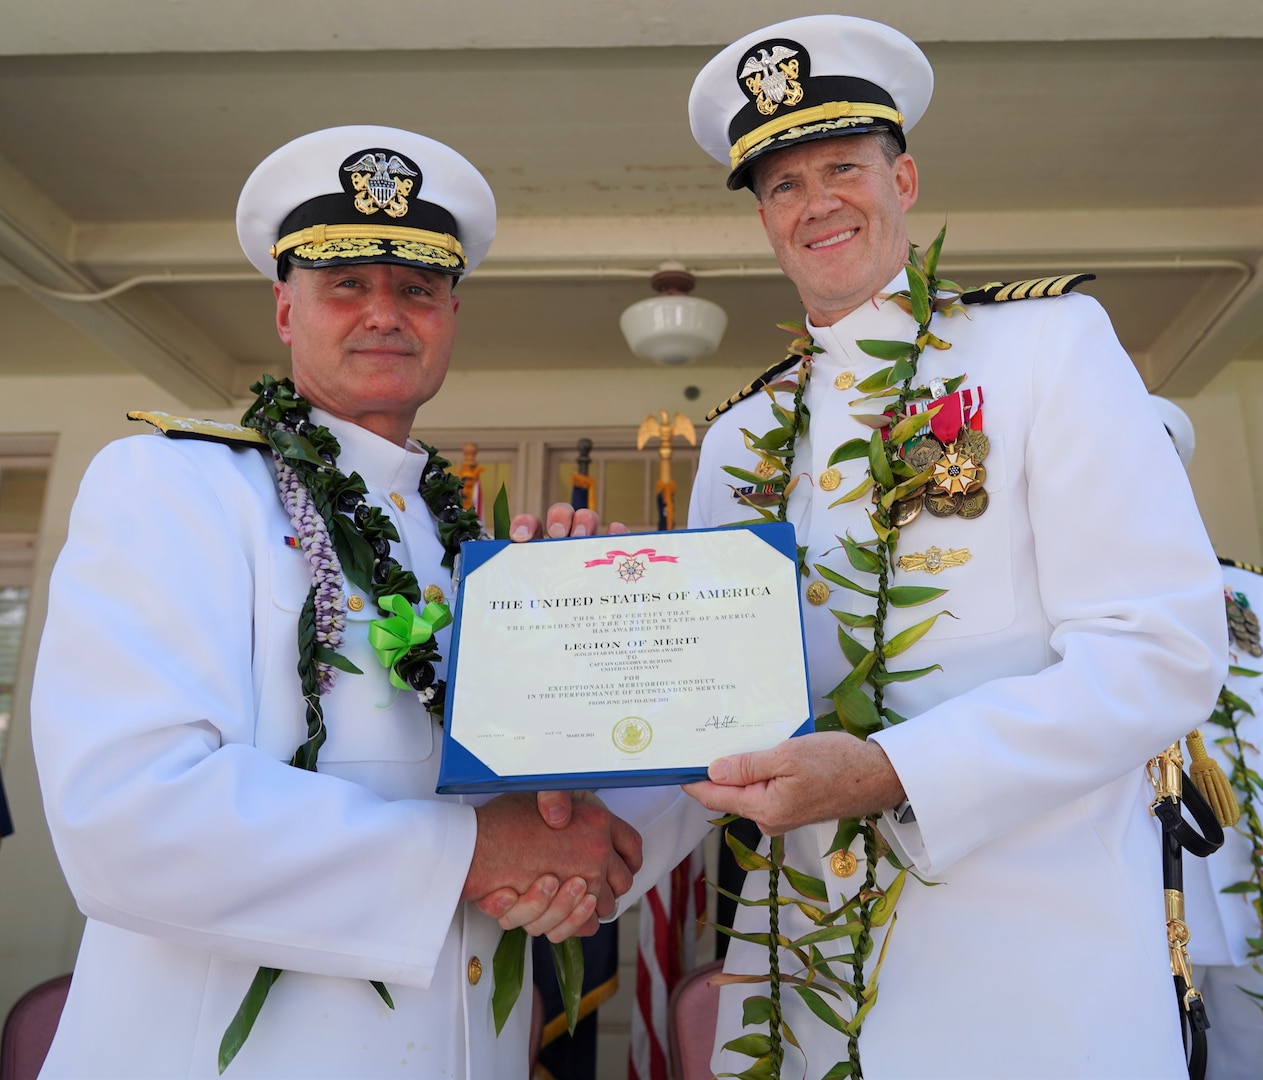 Pearl Harbor, Hawaii (June 4, 2021) Vice Admiral William J. Galinis, commander, Naval Sea Systems Command, presents Captain Greg Burton, outgoing commander of Pearl Harbor Naval Shipyard and Intermediate Maintenance Facility (PHNSY & IMF), with the Legion of Merit for outstanding service and commitment to duty during his four-year tour as shipyard commander. The award, typically reserved for senior officers, is given for exceptionally meritorious conduct in the performance of outstanding services and achievements. PHNSY & IMF is a field activity of NAVSEA and a one-stop regional maintenance center for the Navy’s surface ships and submarines. (U.S. Navy photo by Justice Vannatta/Released)